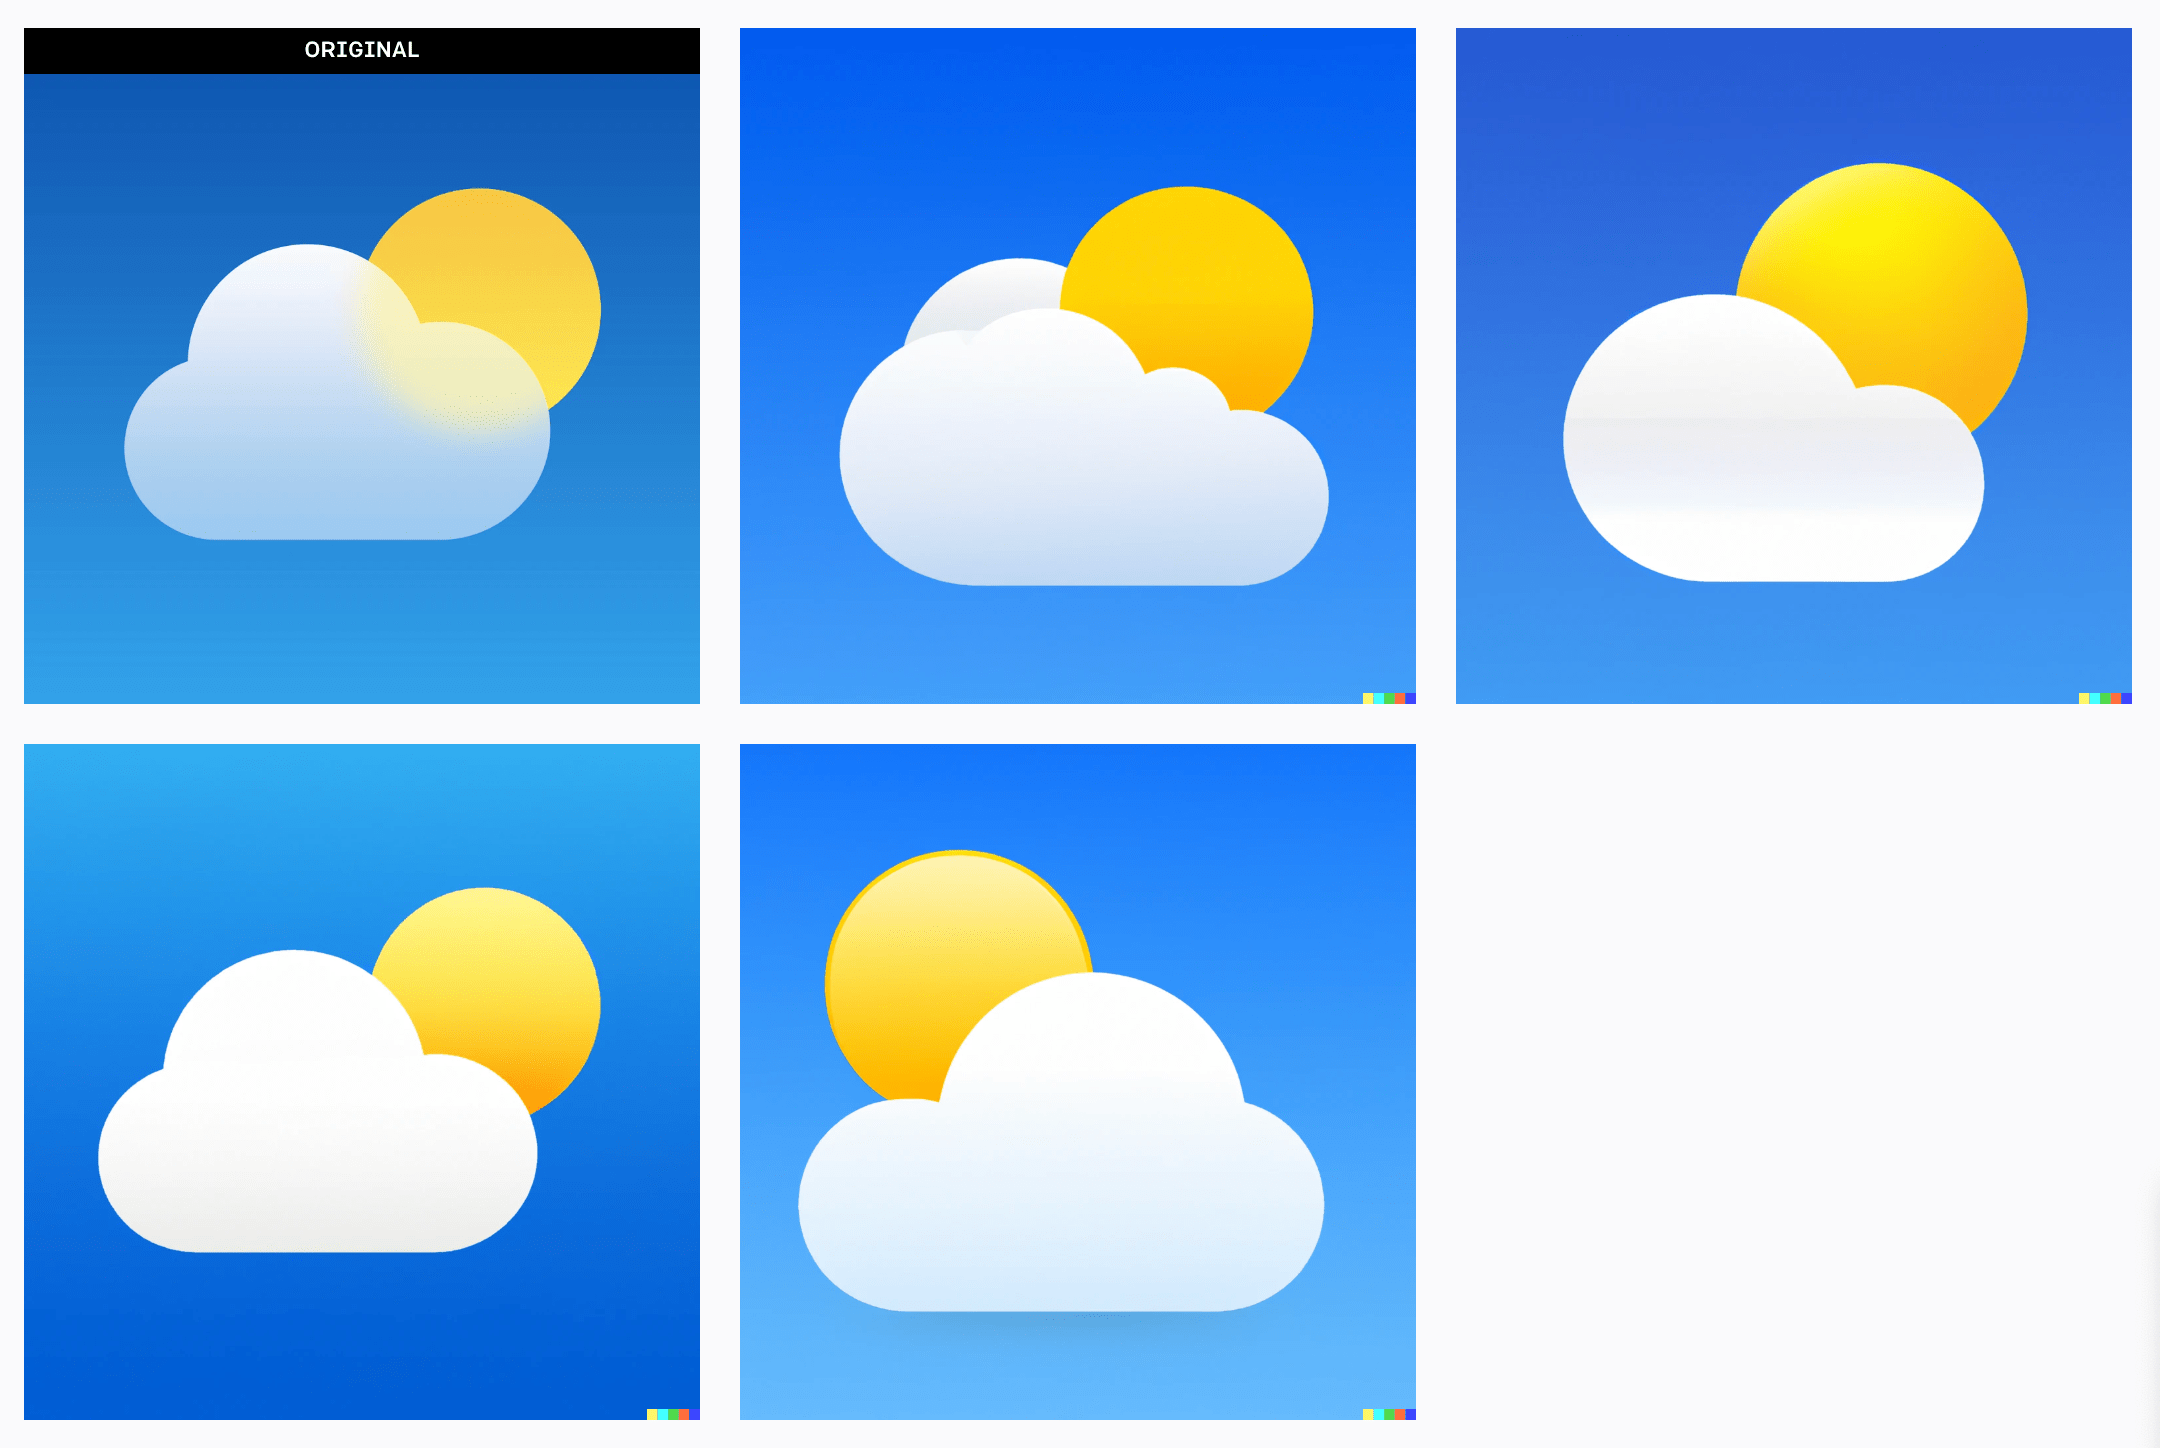 The original “Weather” app icon with 4 AI-generated variations alongside it.